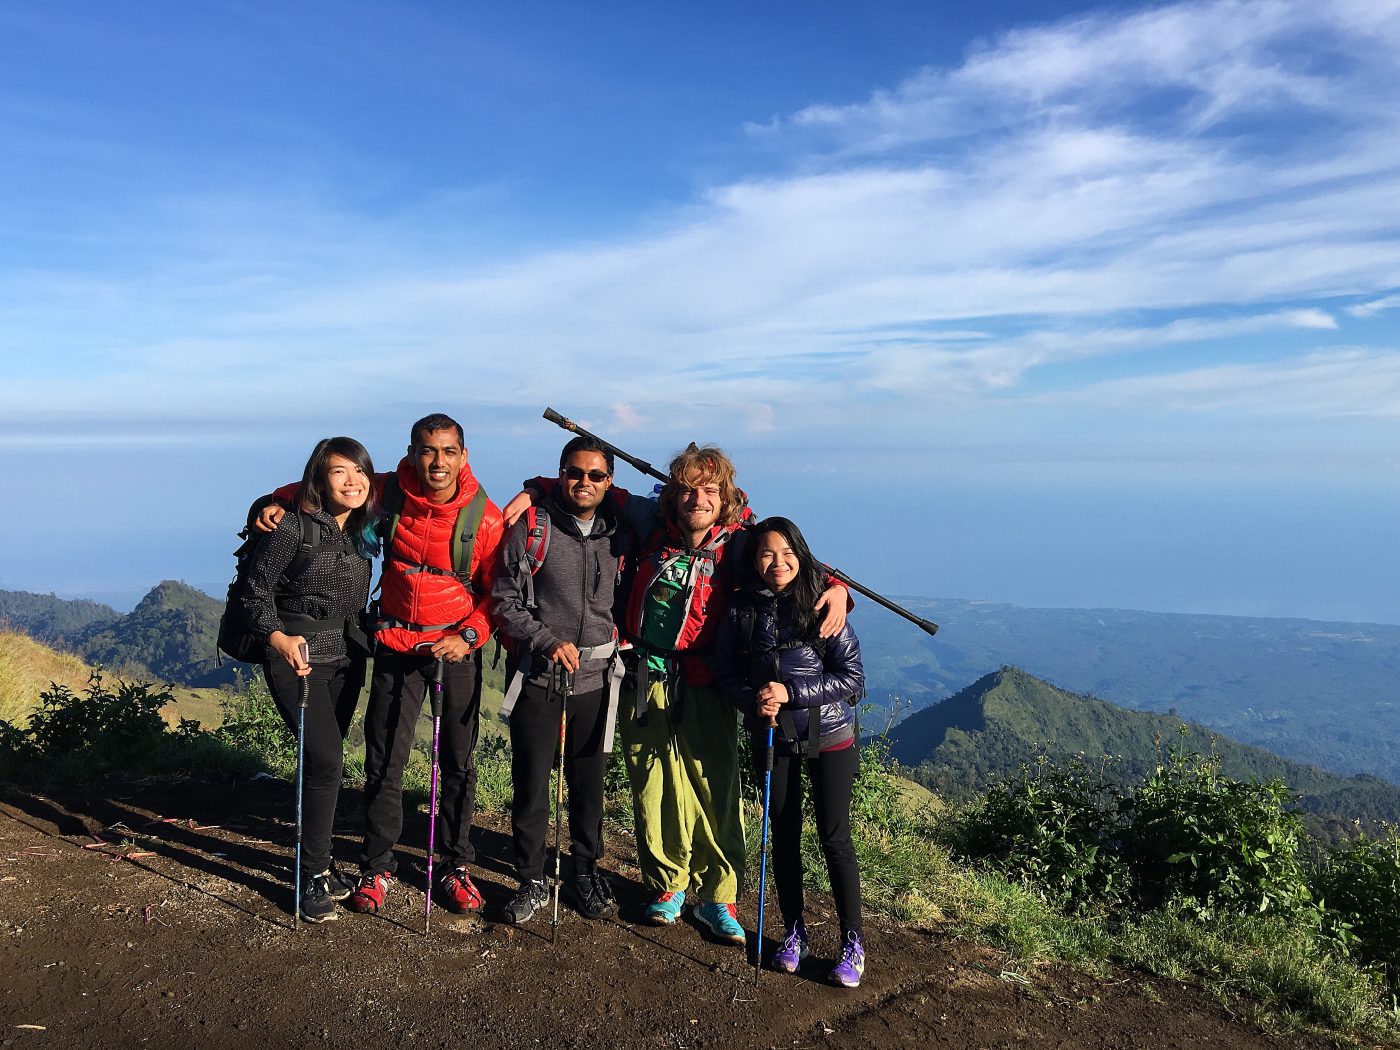 Team Rinjani - One last picture before we descended